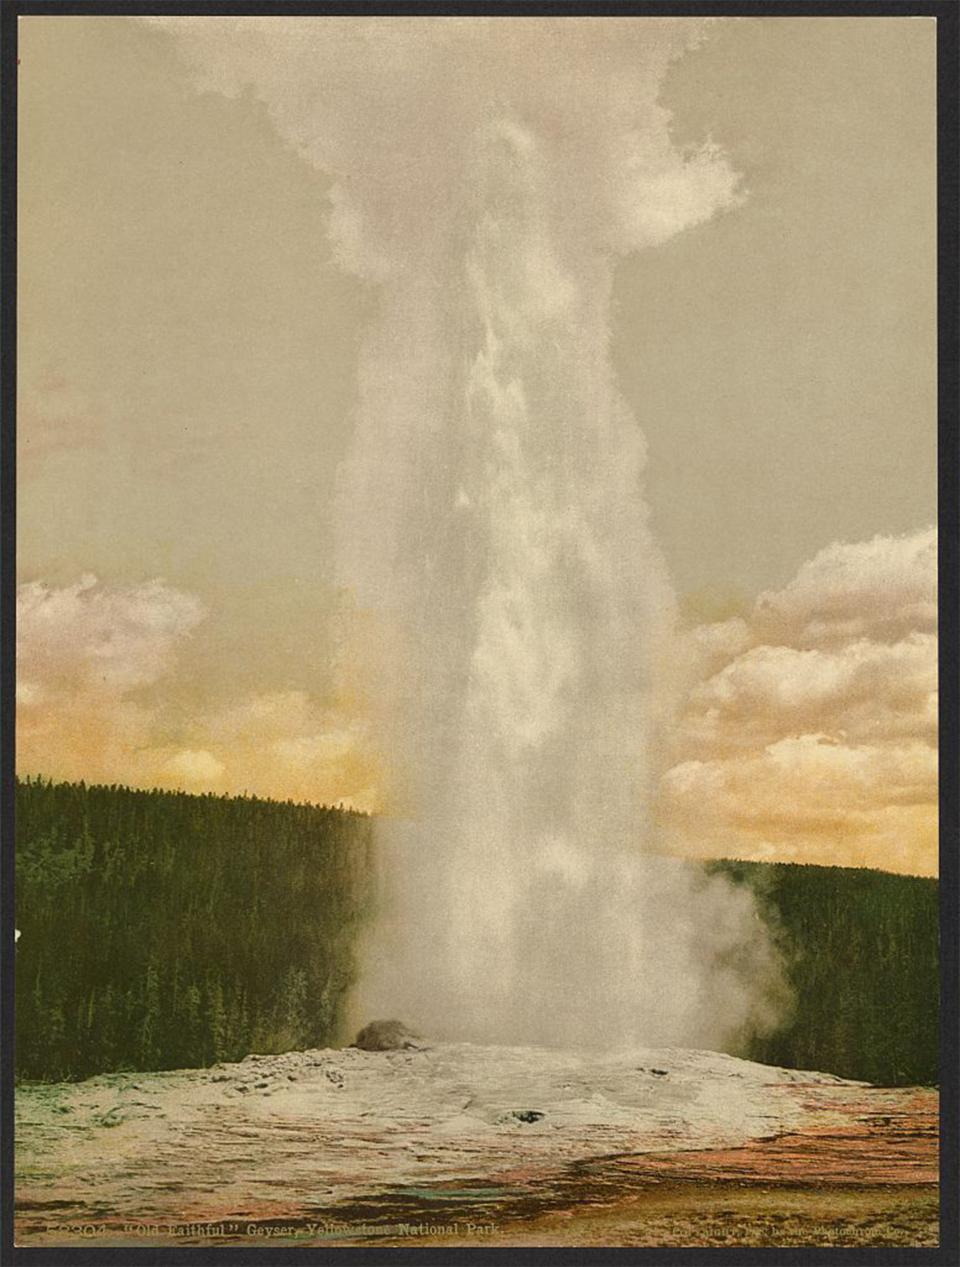 After their time at Yellowstone Lake, Hayden led a small party including Jackson and Moran over a divide to the Firehole Basin, where they saw Castle Geyser and Old Faithful. Jackson made this image much later, from a process using a hand-painted negative. William Henry Jackson, photochrom print, 1898, Library of Congress.